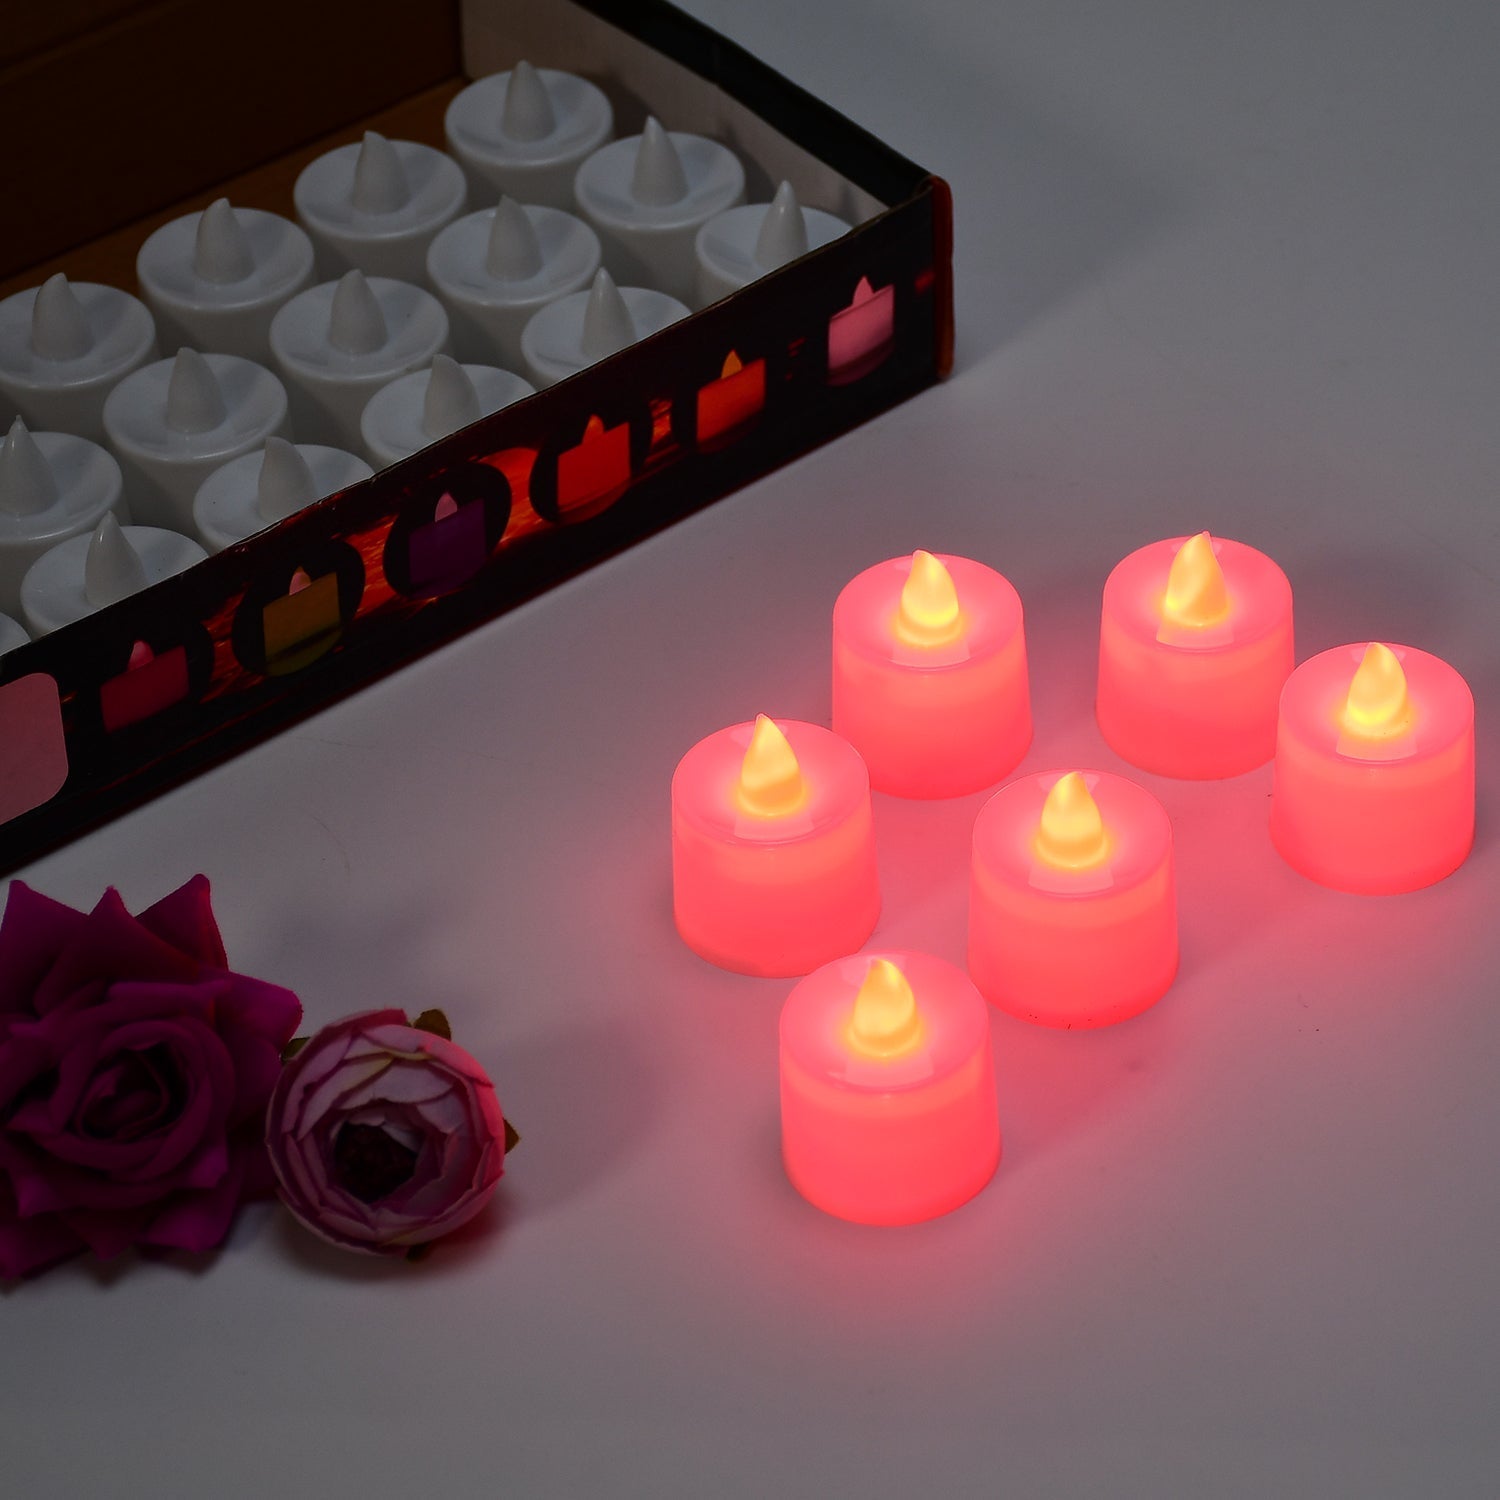 6633 Red Flameless LED Tealights, Smokeless Plastic Decorative Candles - Led Tea Light Candle For Home Decoration (Pack Of 24) DeoDap